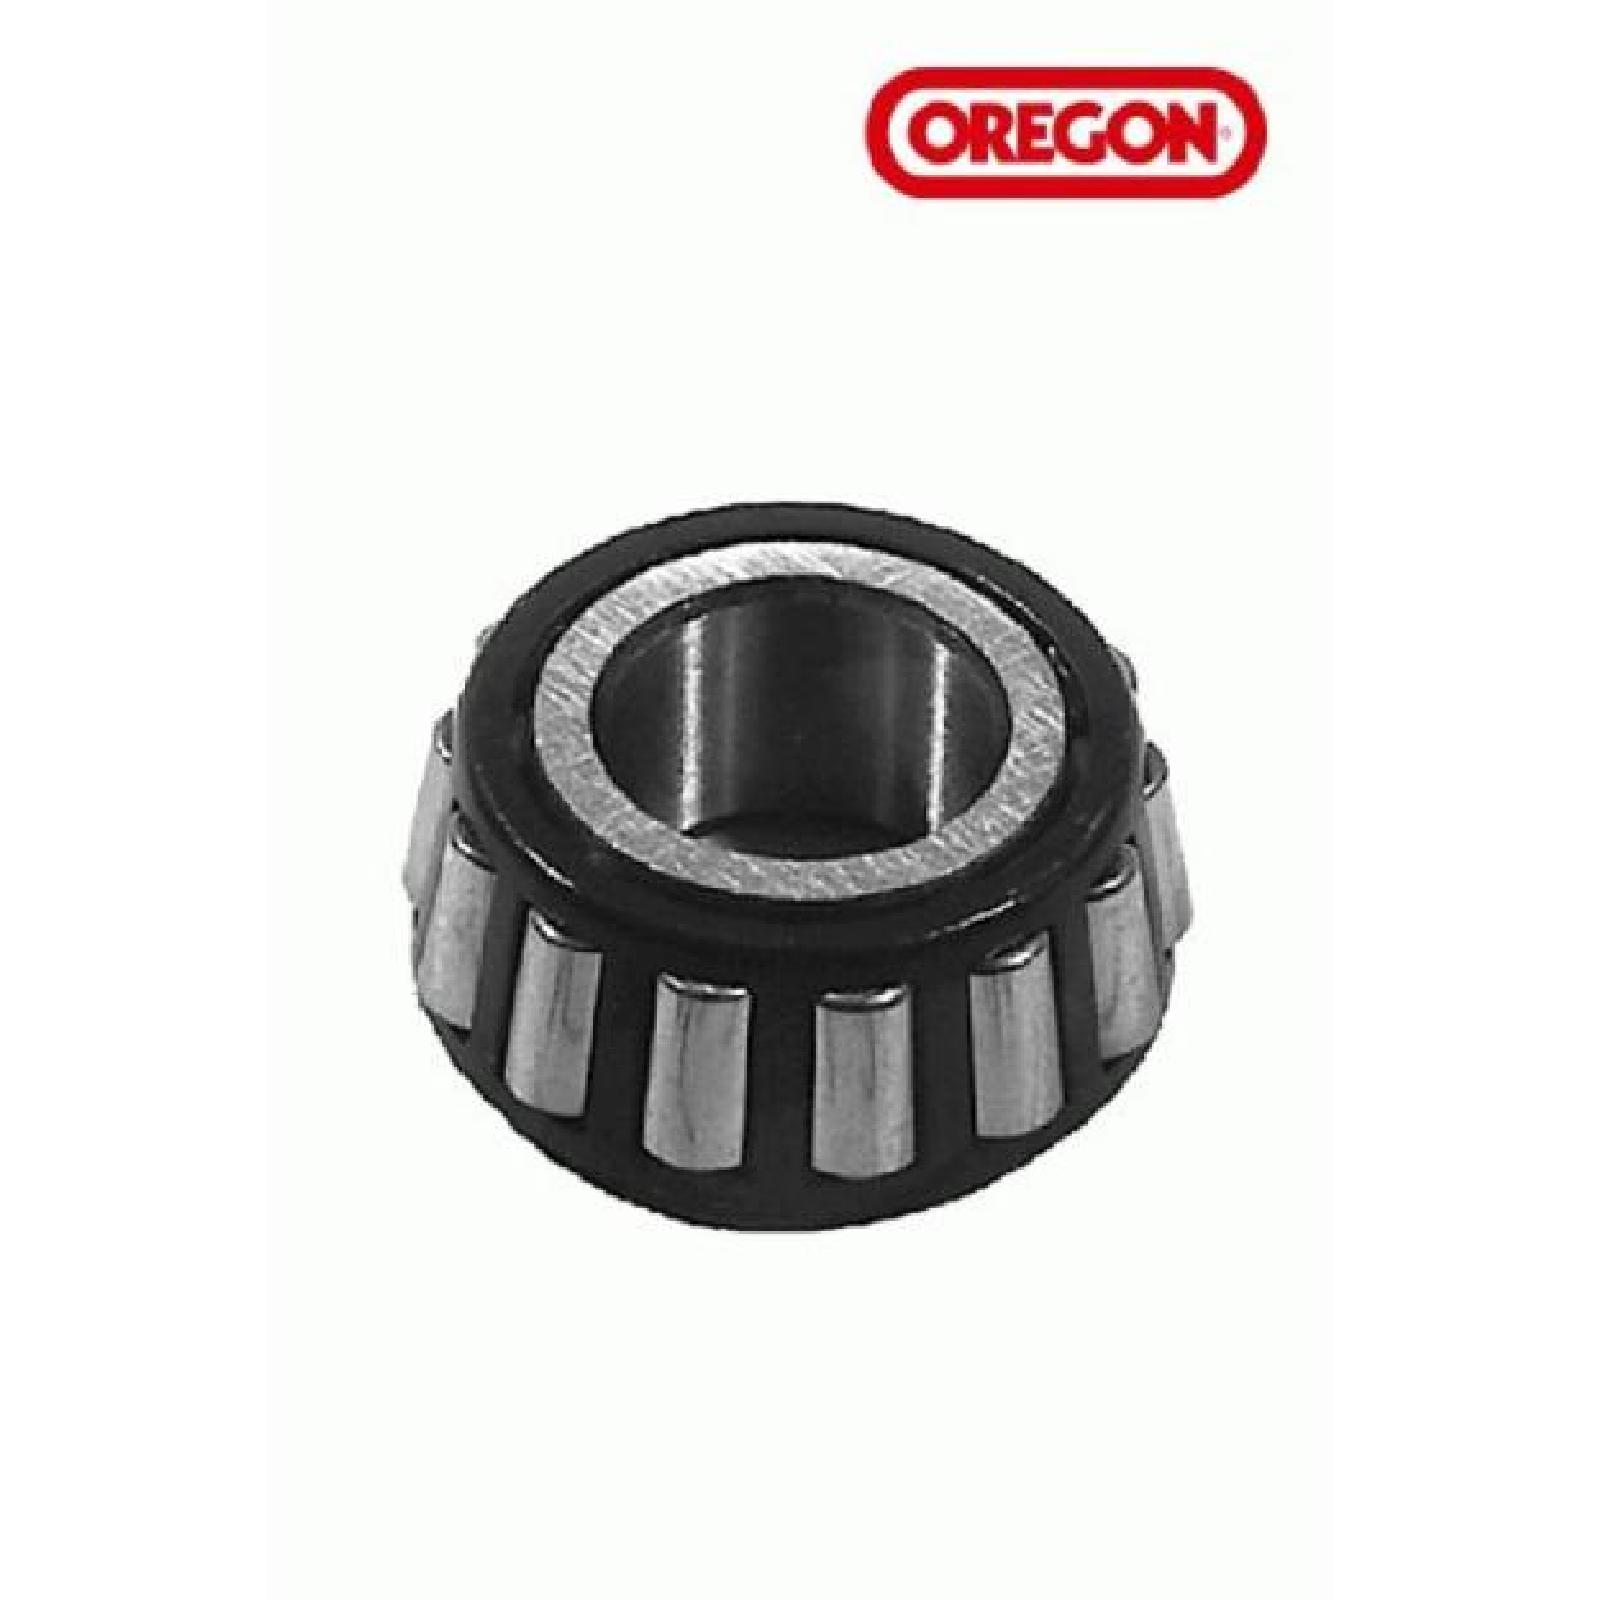 BEARING, TAPERED ROLLER . part# 45205 by Oregon